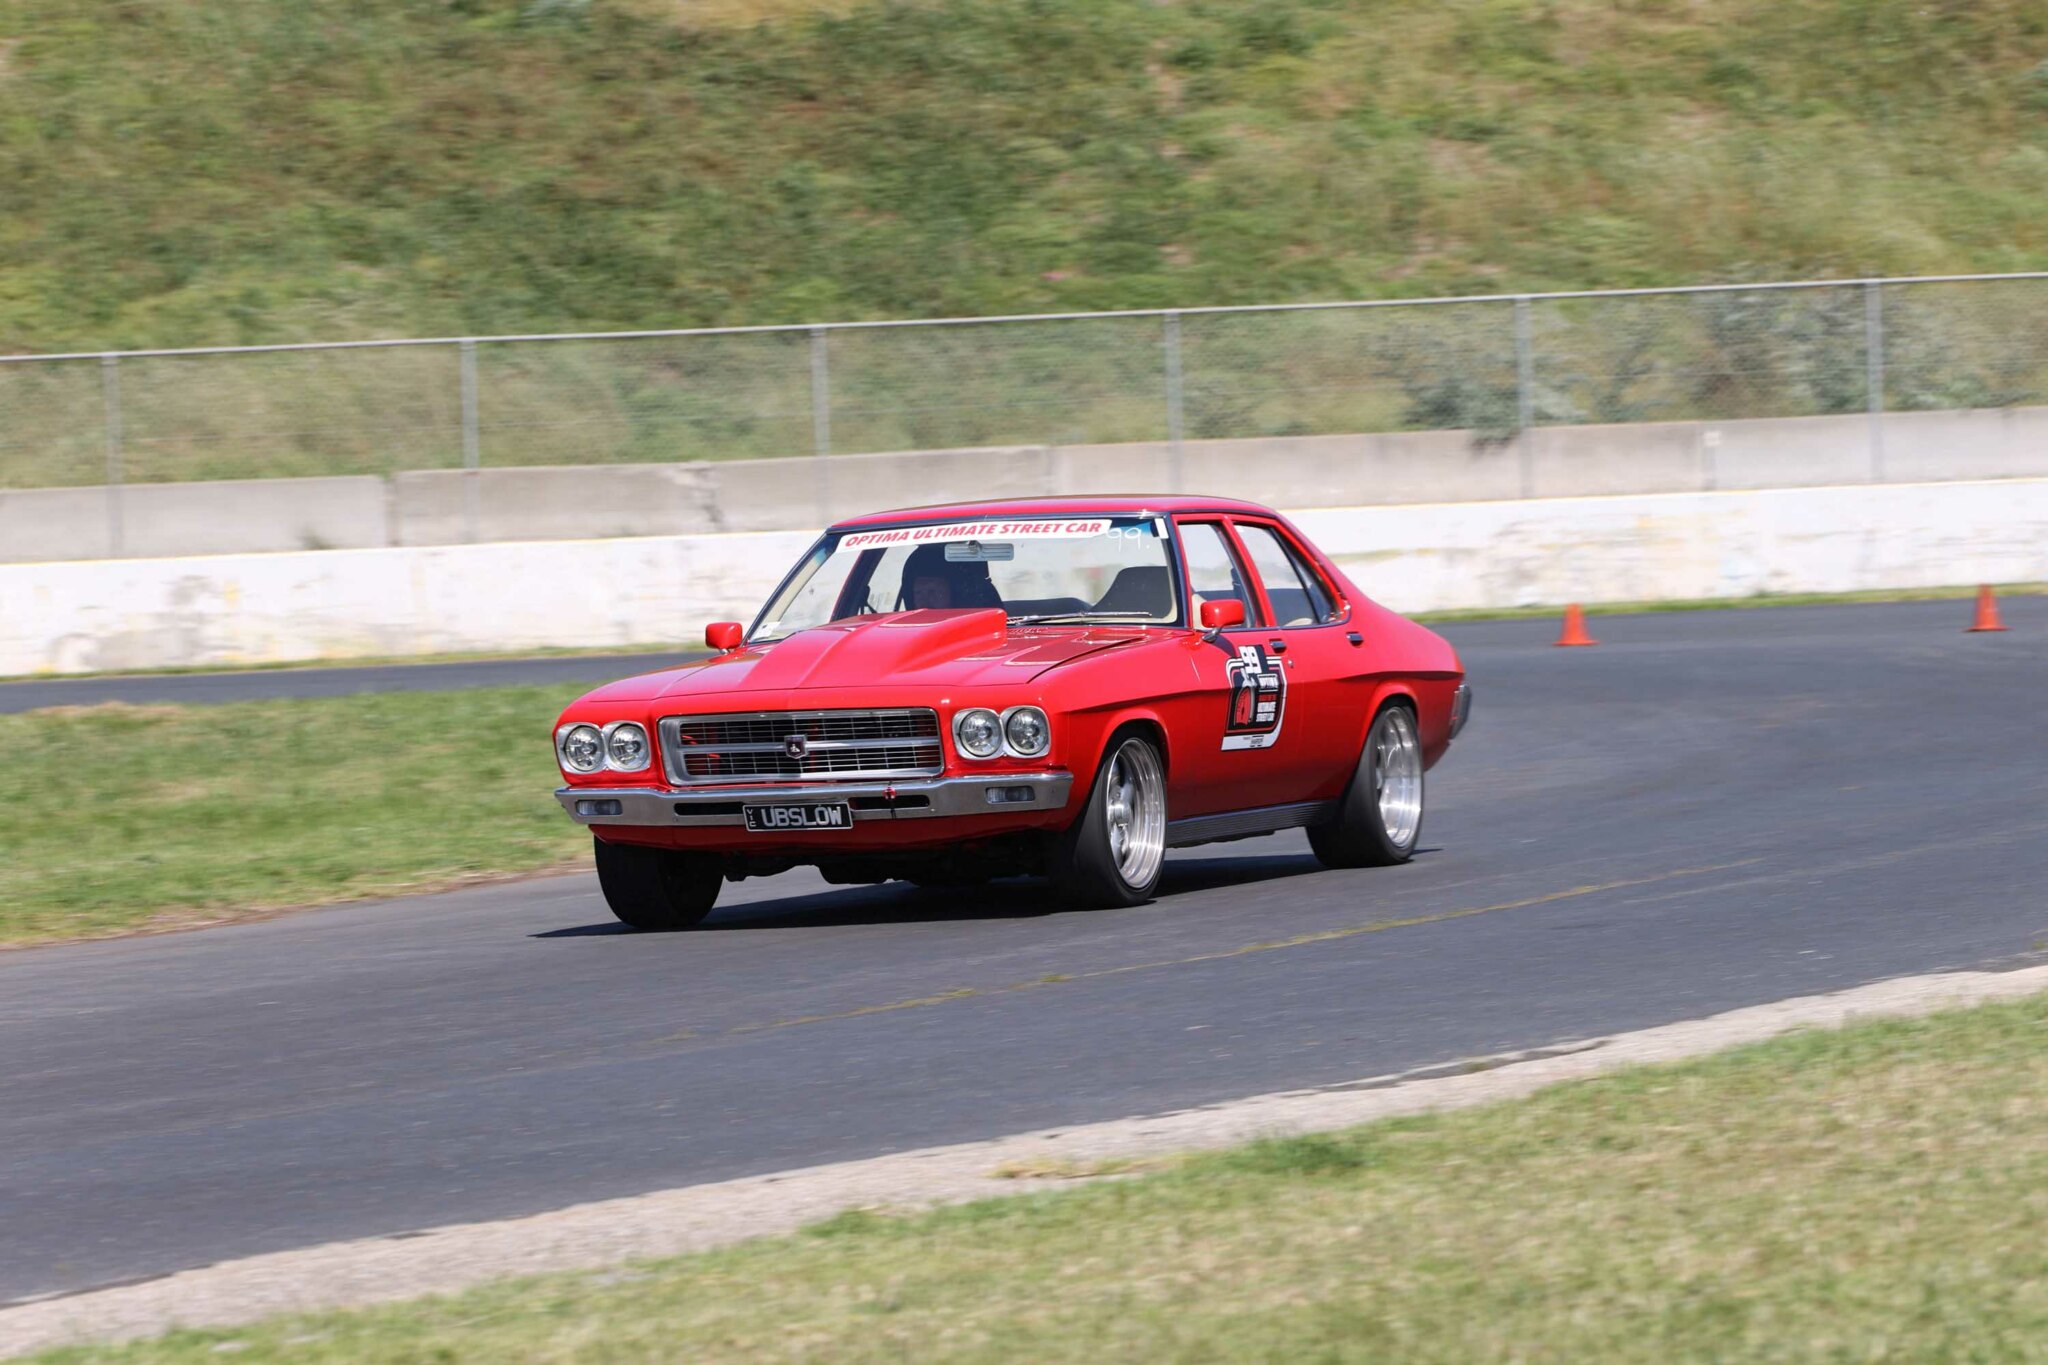 Harrop-blown HQ at the Optima Ultimate Street Car Challenge